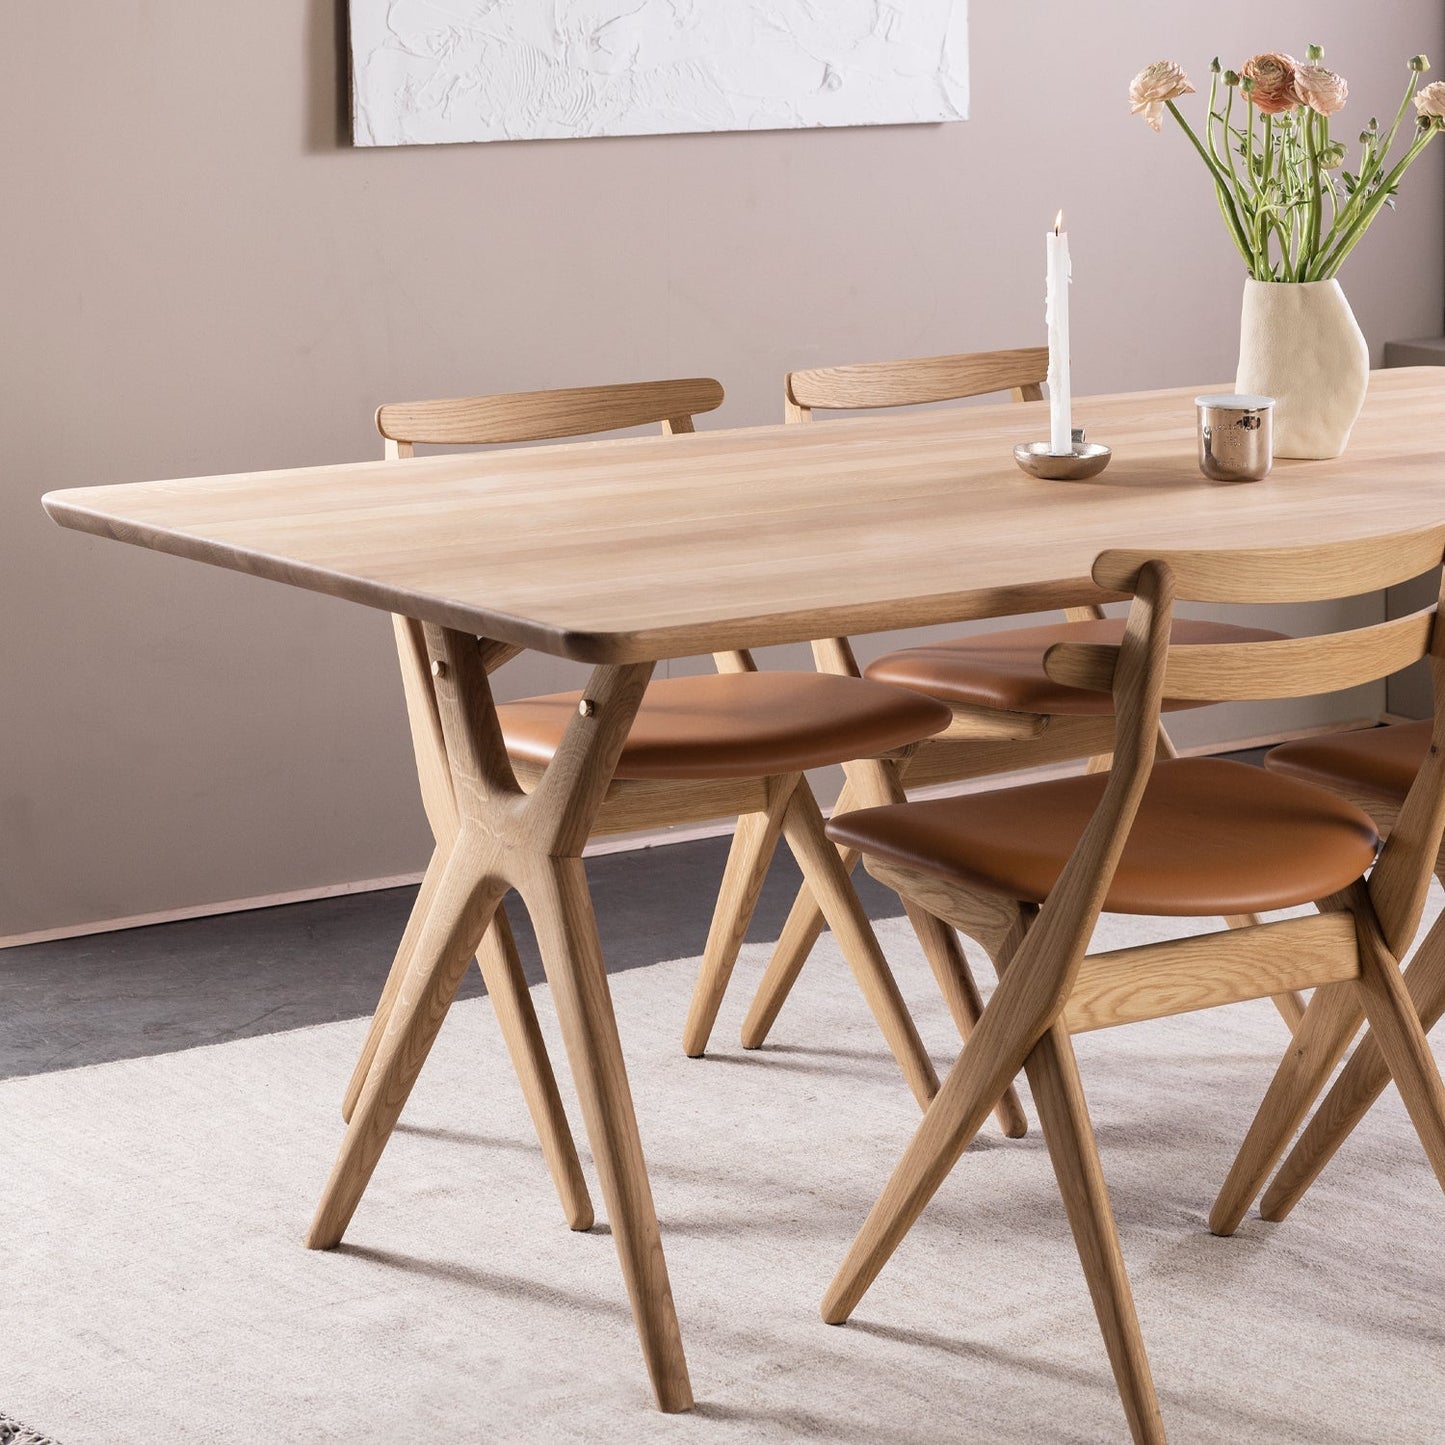 Rose Hill Oak Dining Table With Rounded Corners With Brass - 220cm Extending